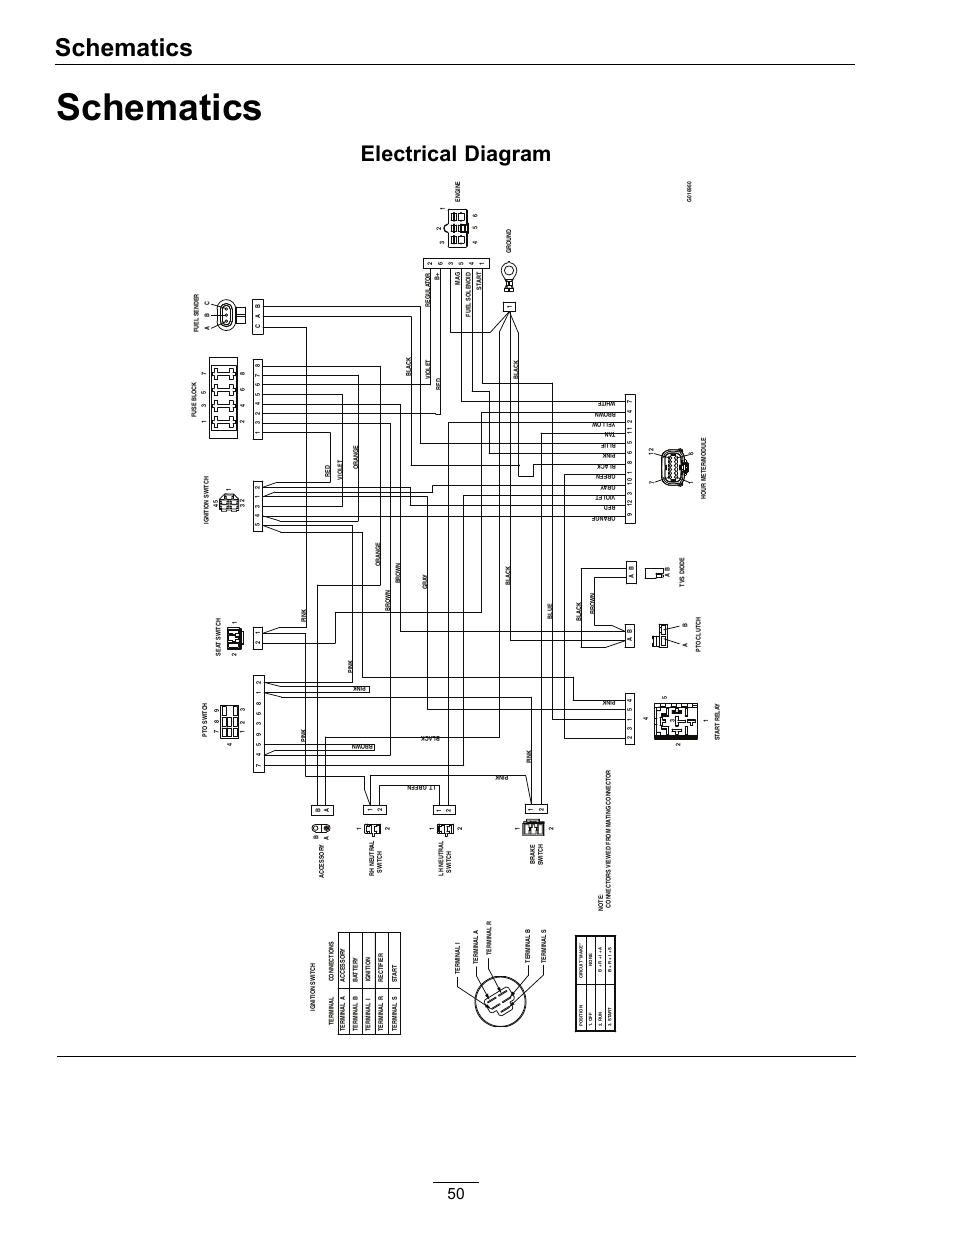 wiring diagram for lxer 120/208-240(3w)/60/1